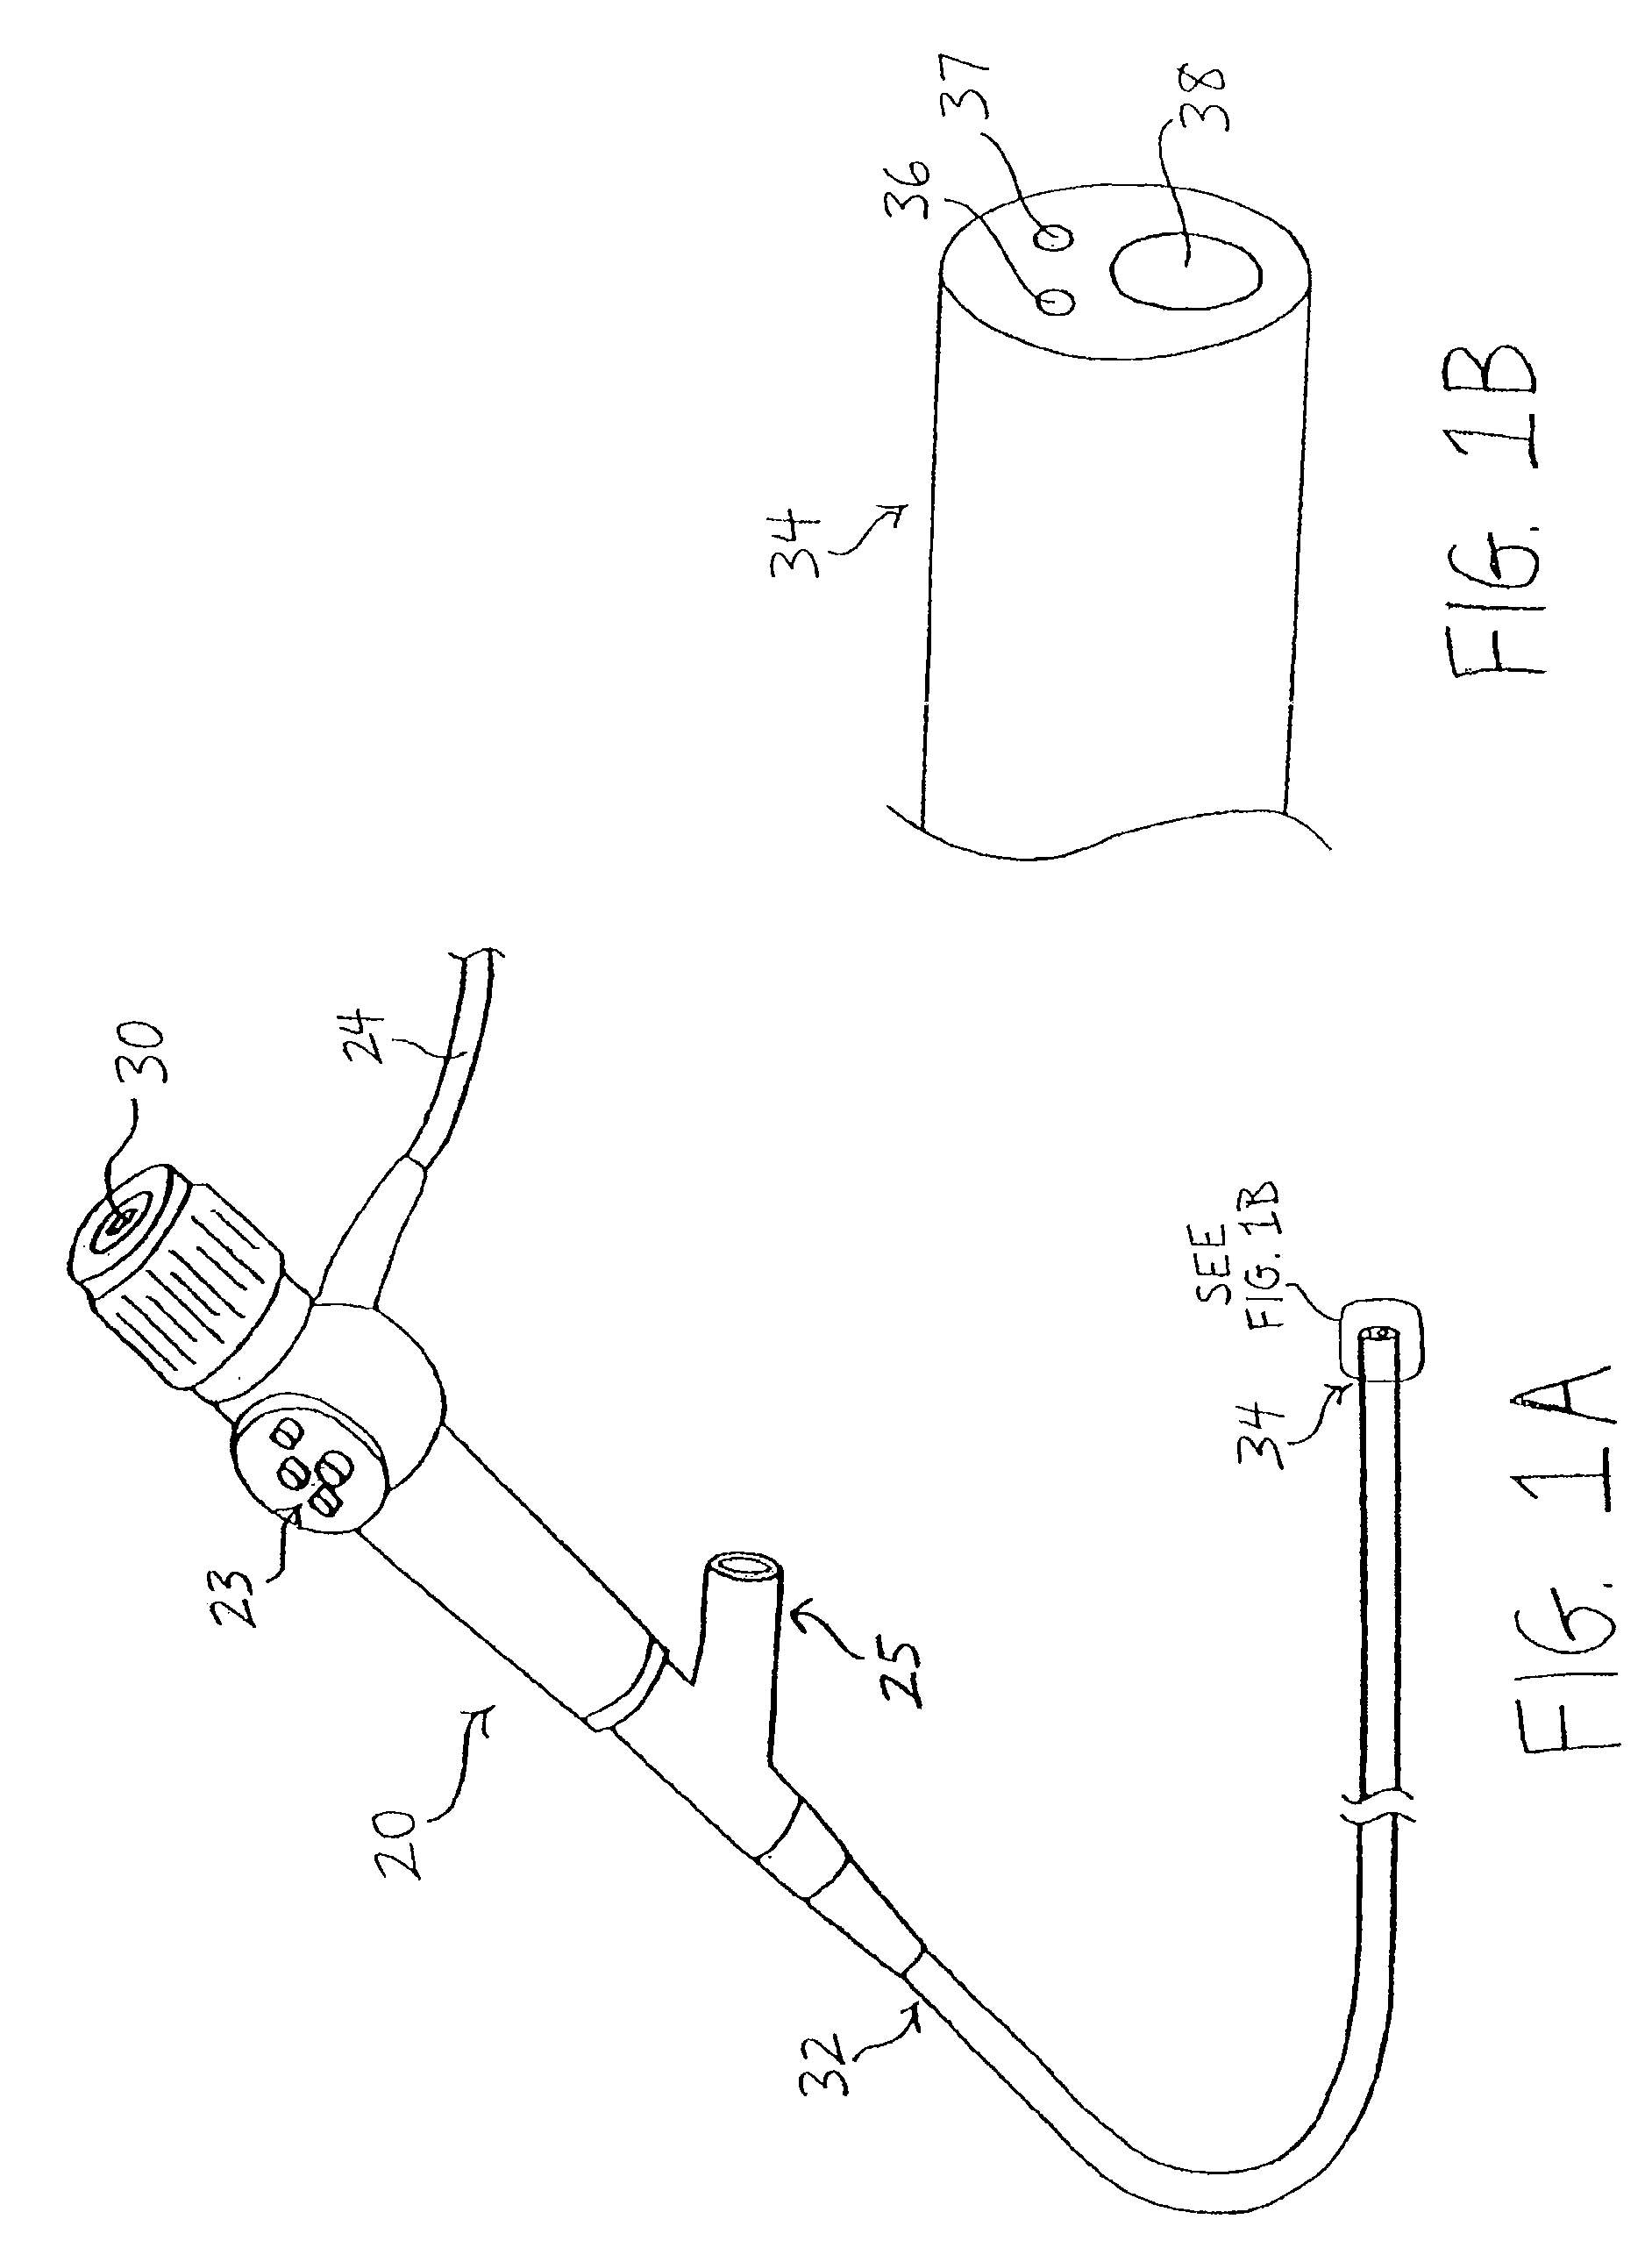 Endoscopic systems and methods for resection of tissue